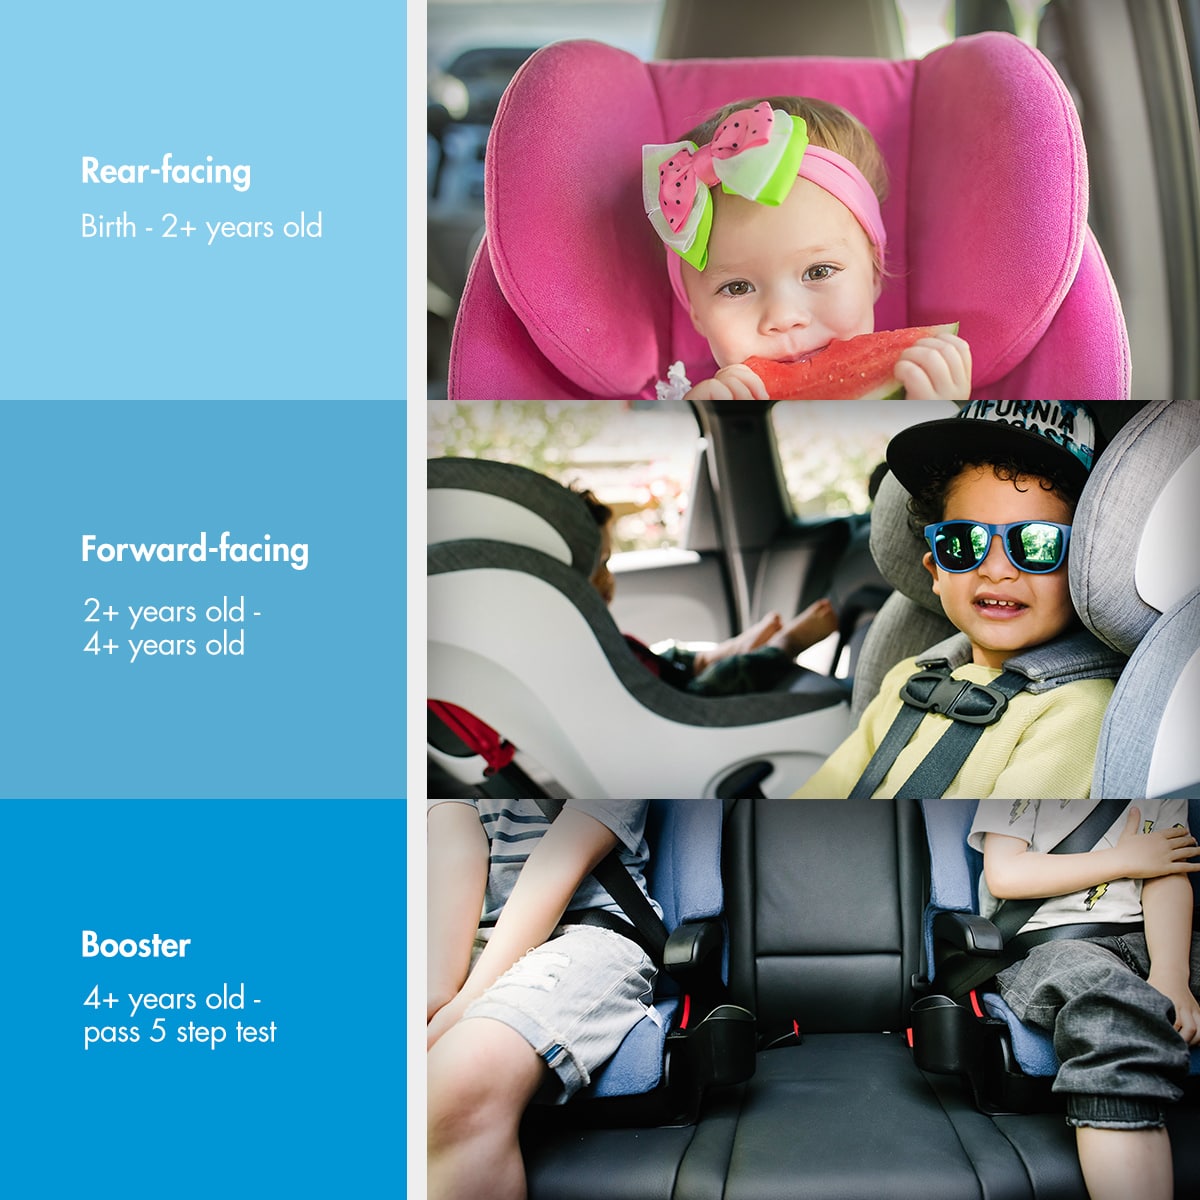 Car Seat Guide From Birth to 5-Step Test